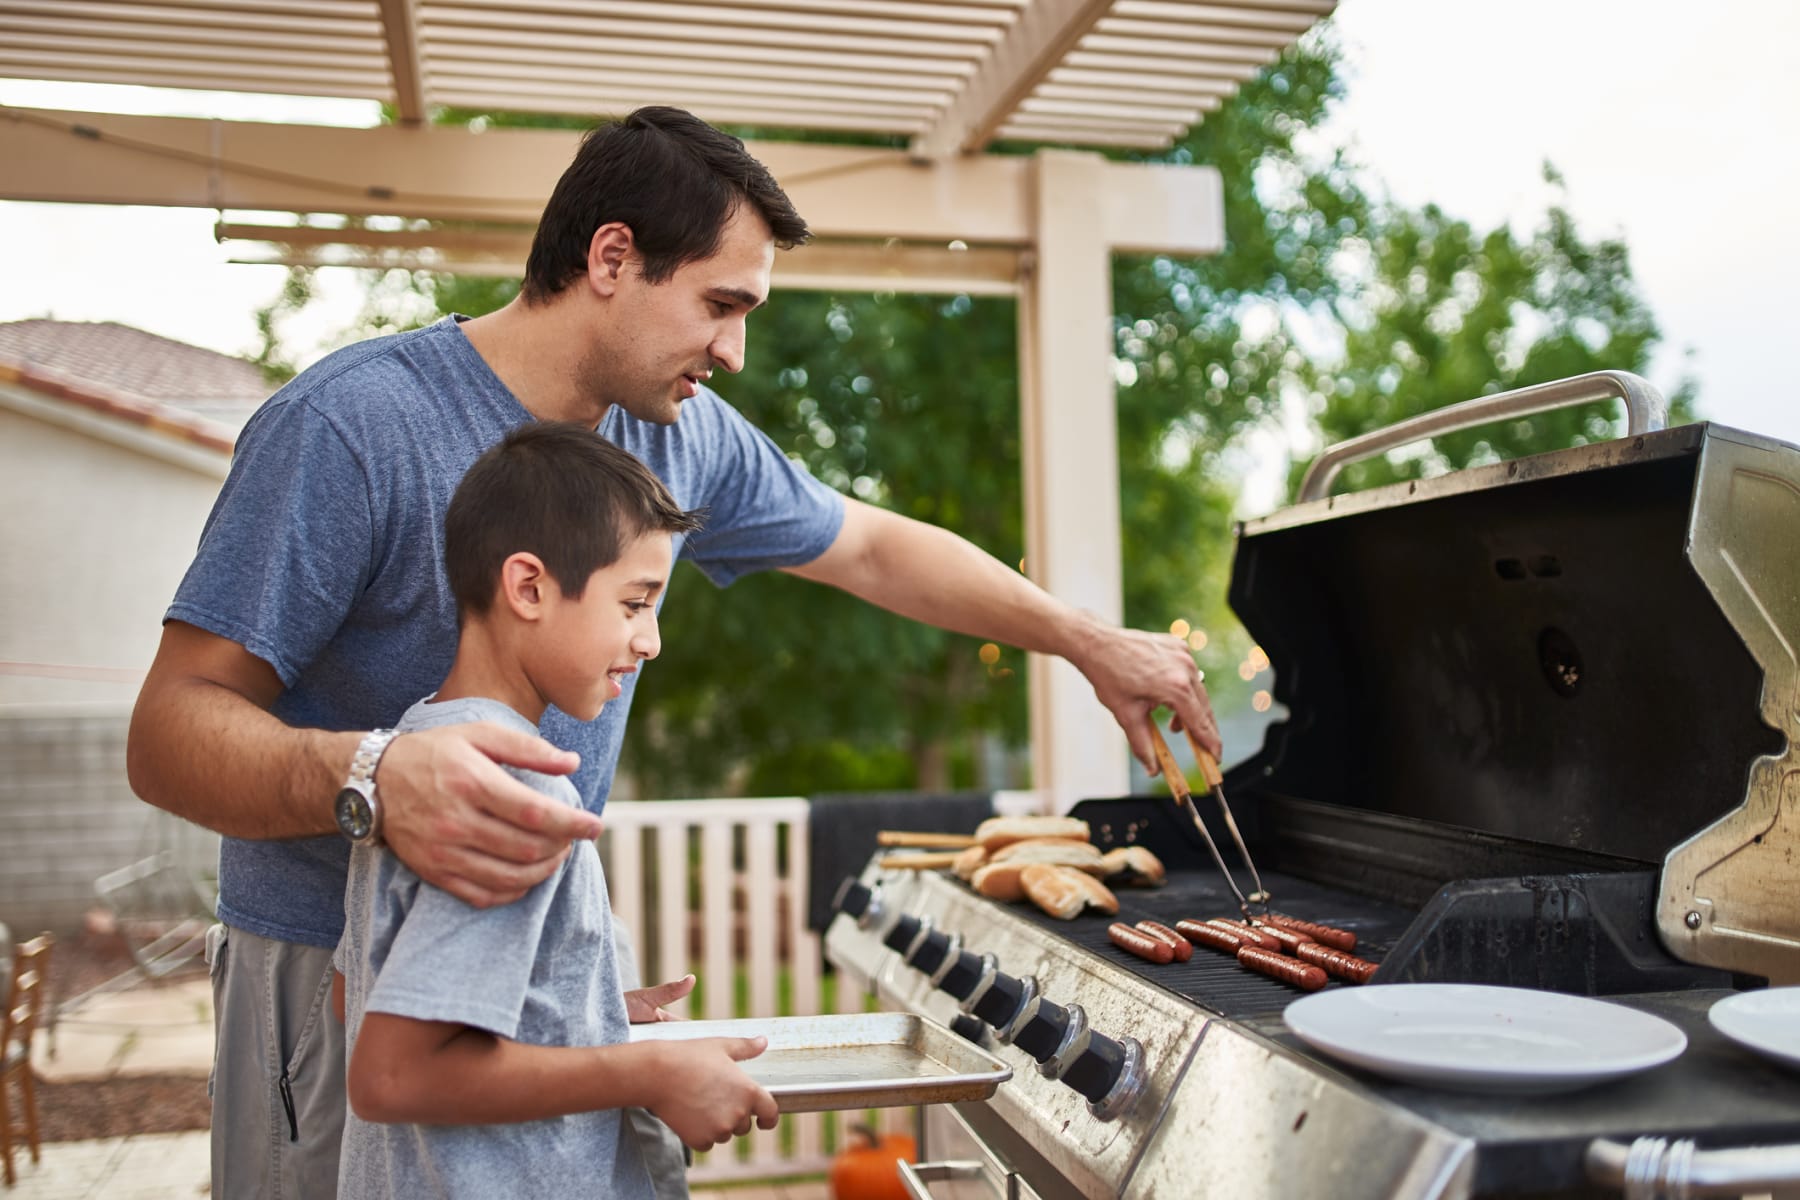 Father teaches son how to grill.